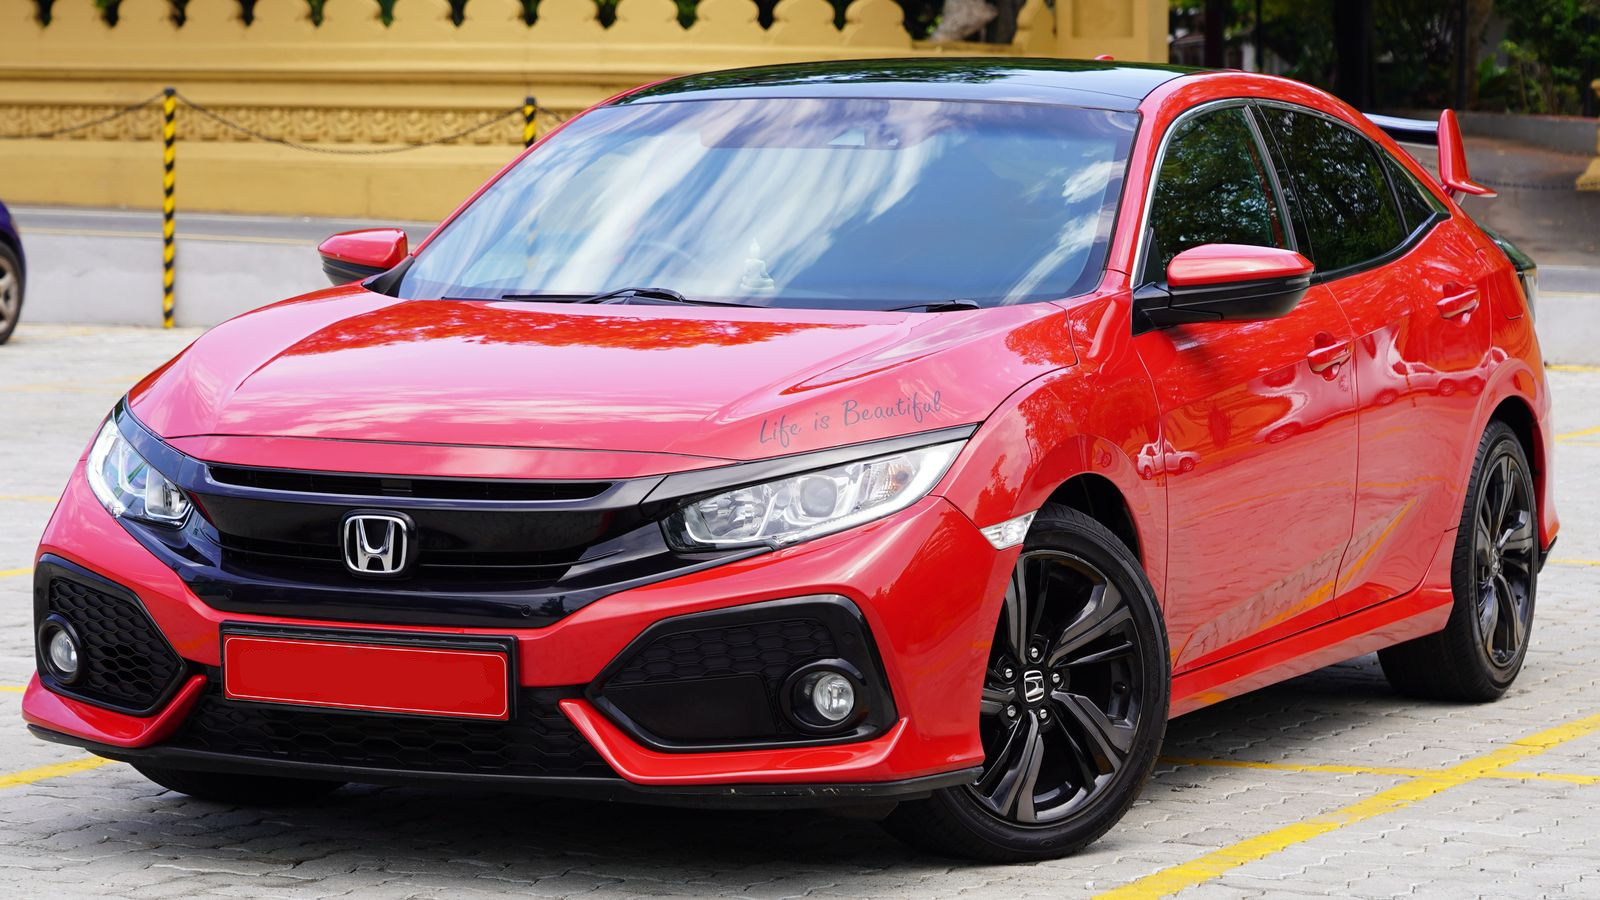 Honda Civic front + side view